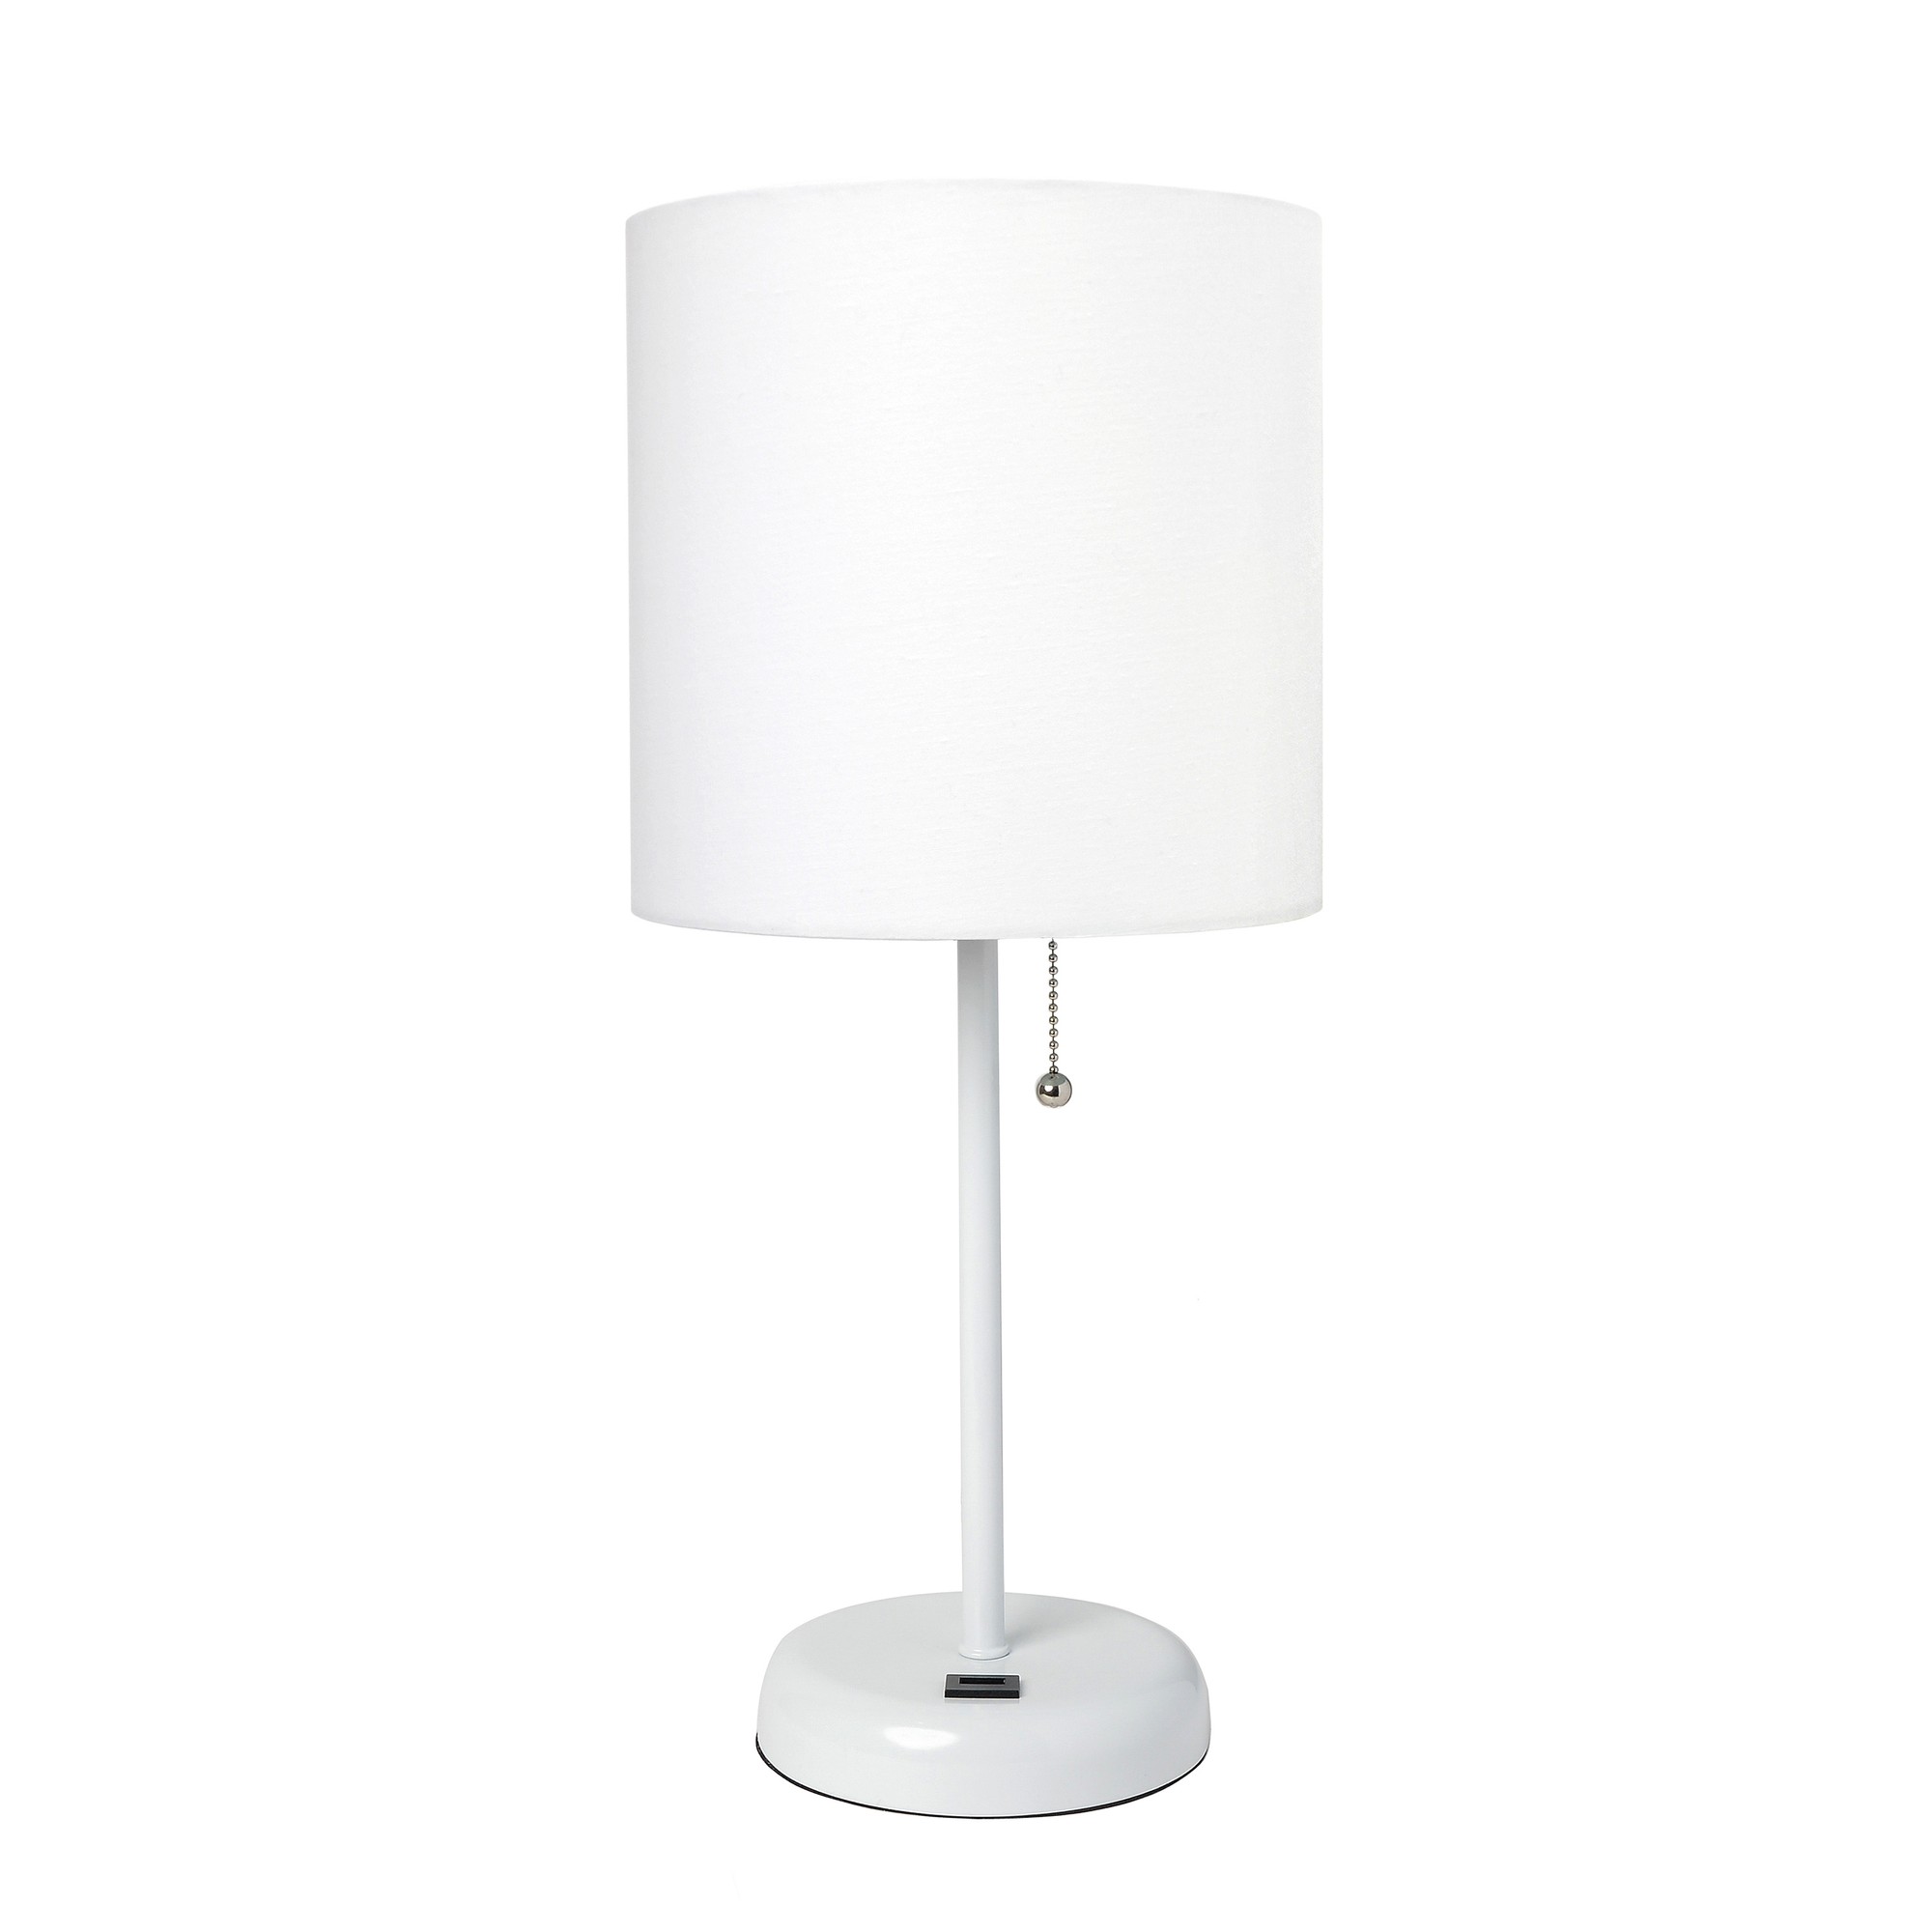 Simple Designs White Stick Lamp with USB charging port and Fabric Shade, White